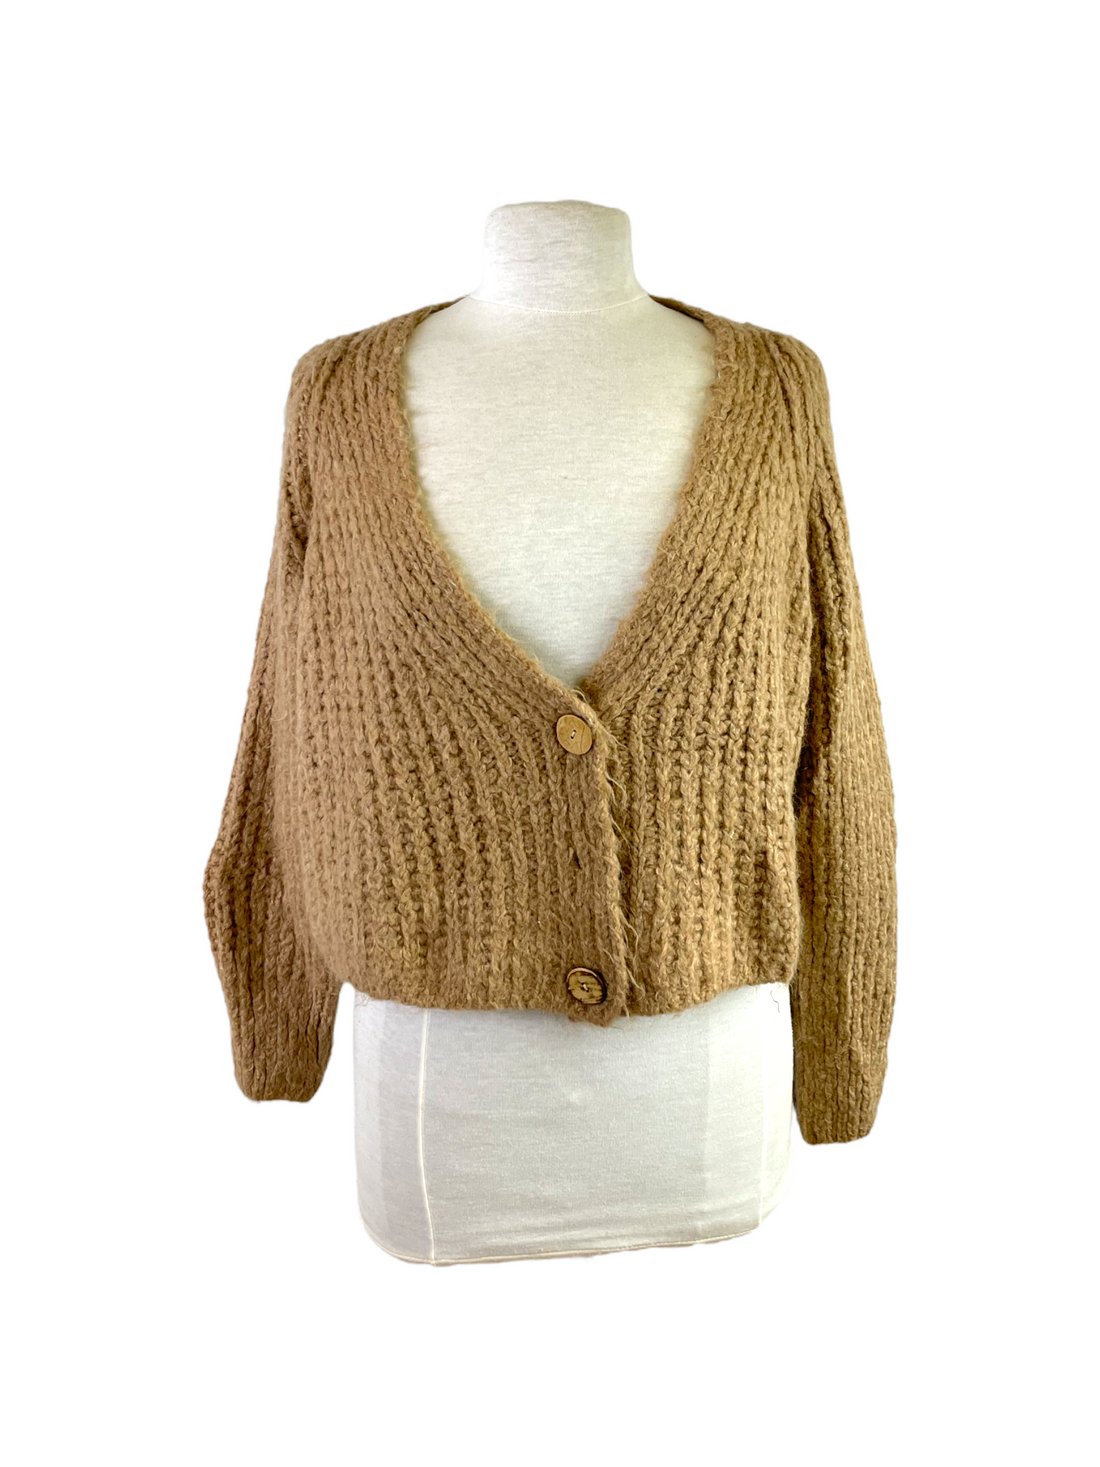 KNITTED CROP CARDING